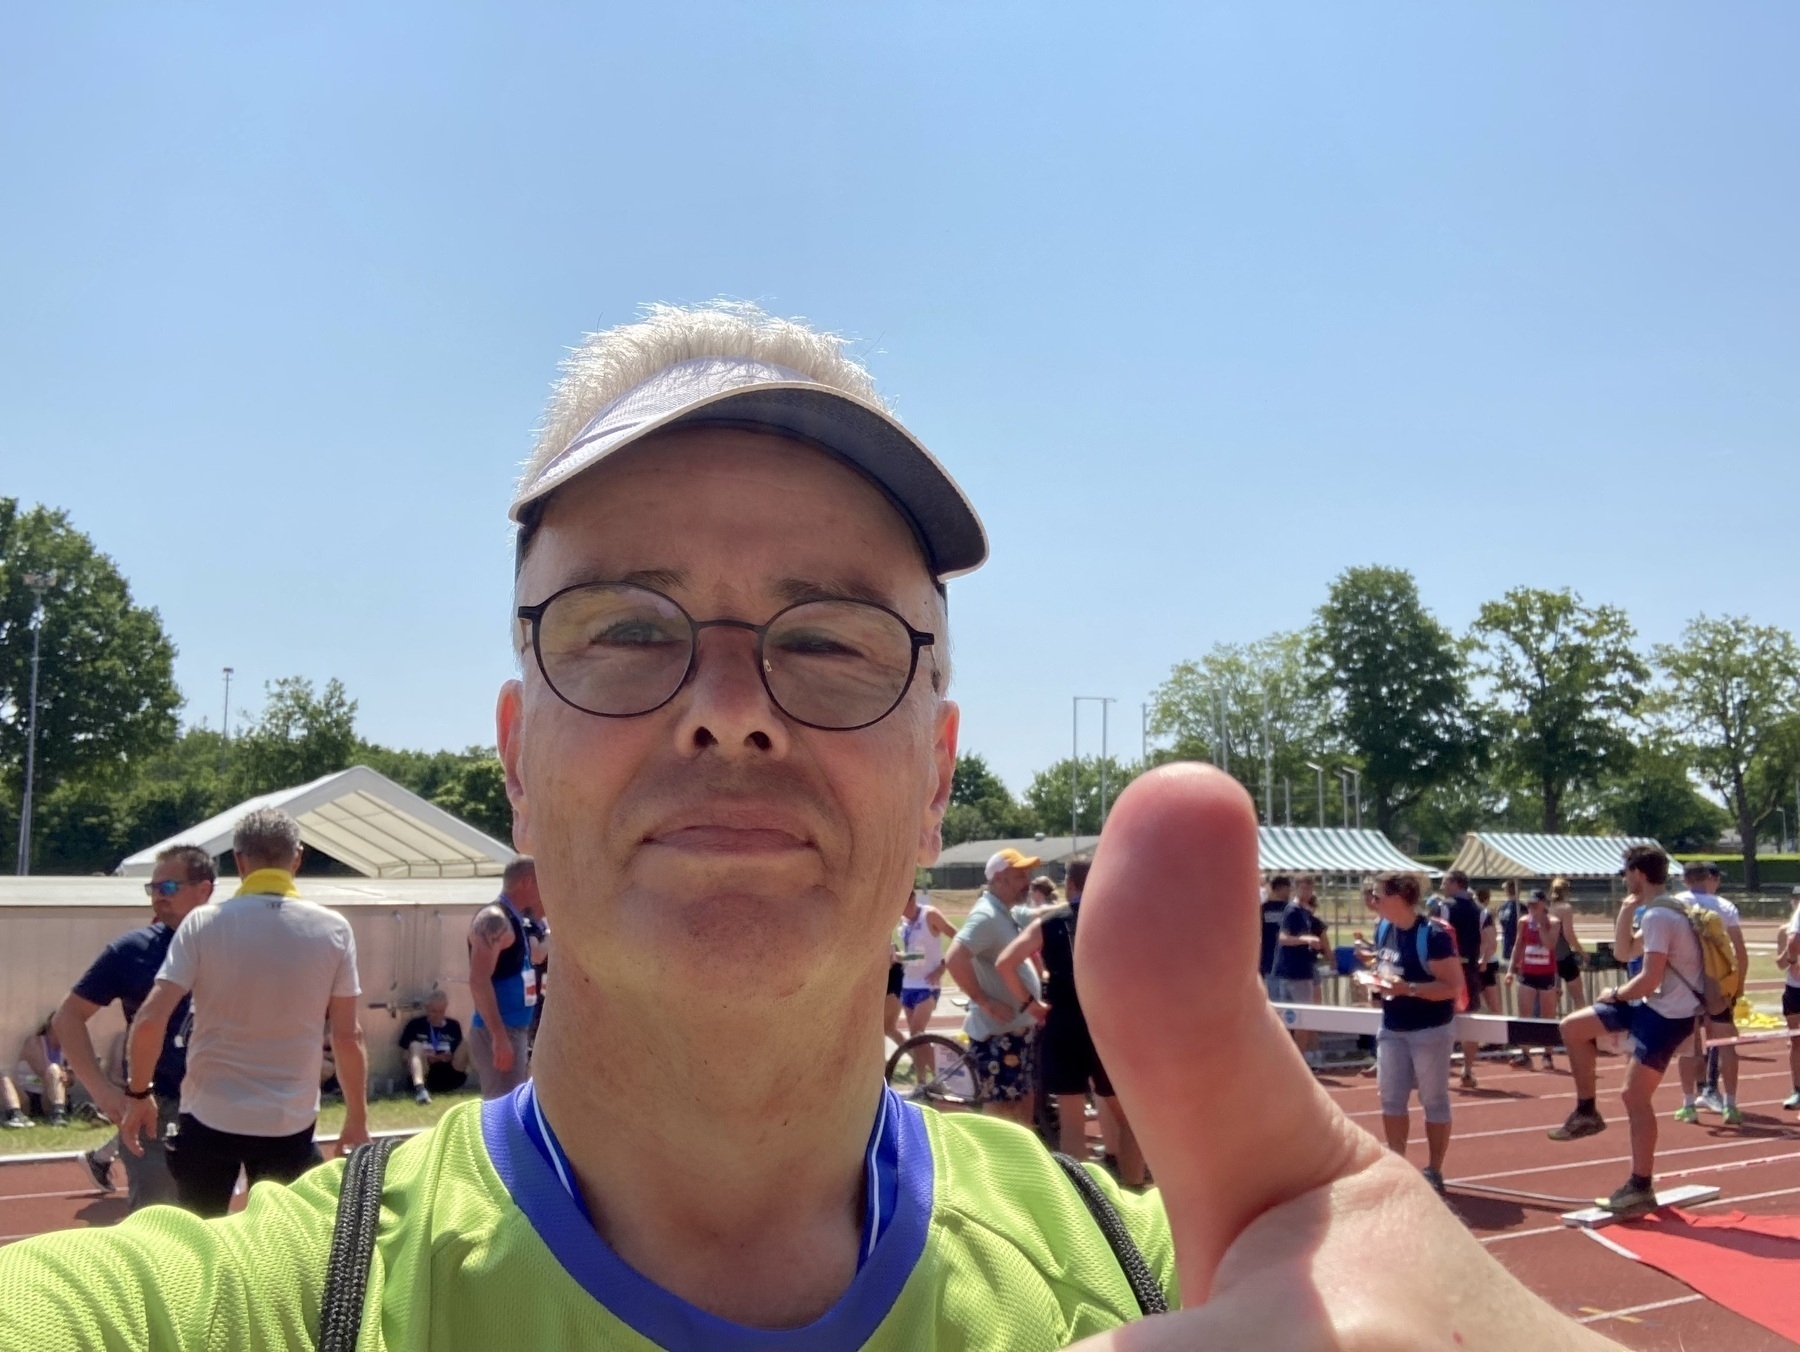 I put my thumb up after I finished at the track and field club